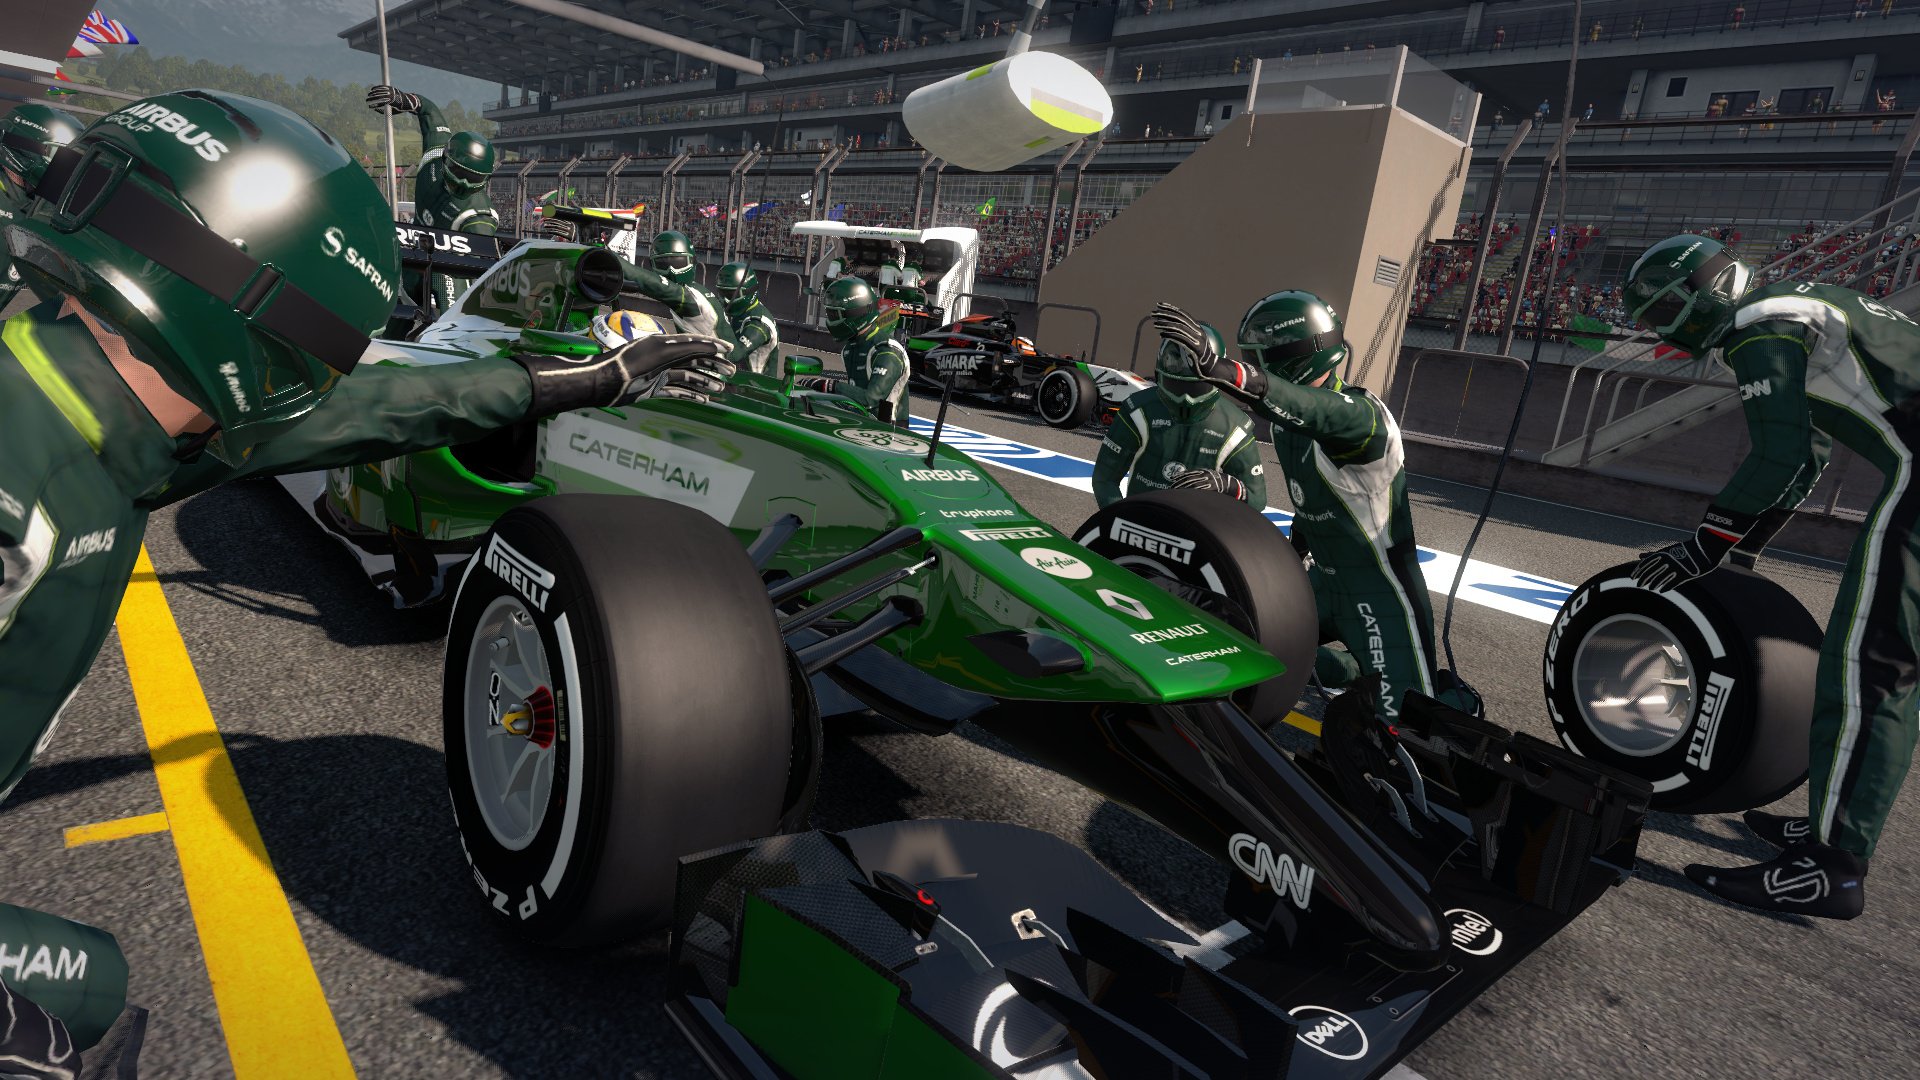 F1 2014 (PS3 / PlayStation 3) Game Profile | News, Reviews, Videos ...